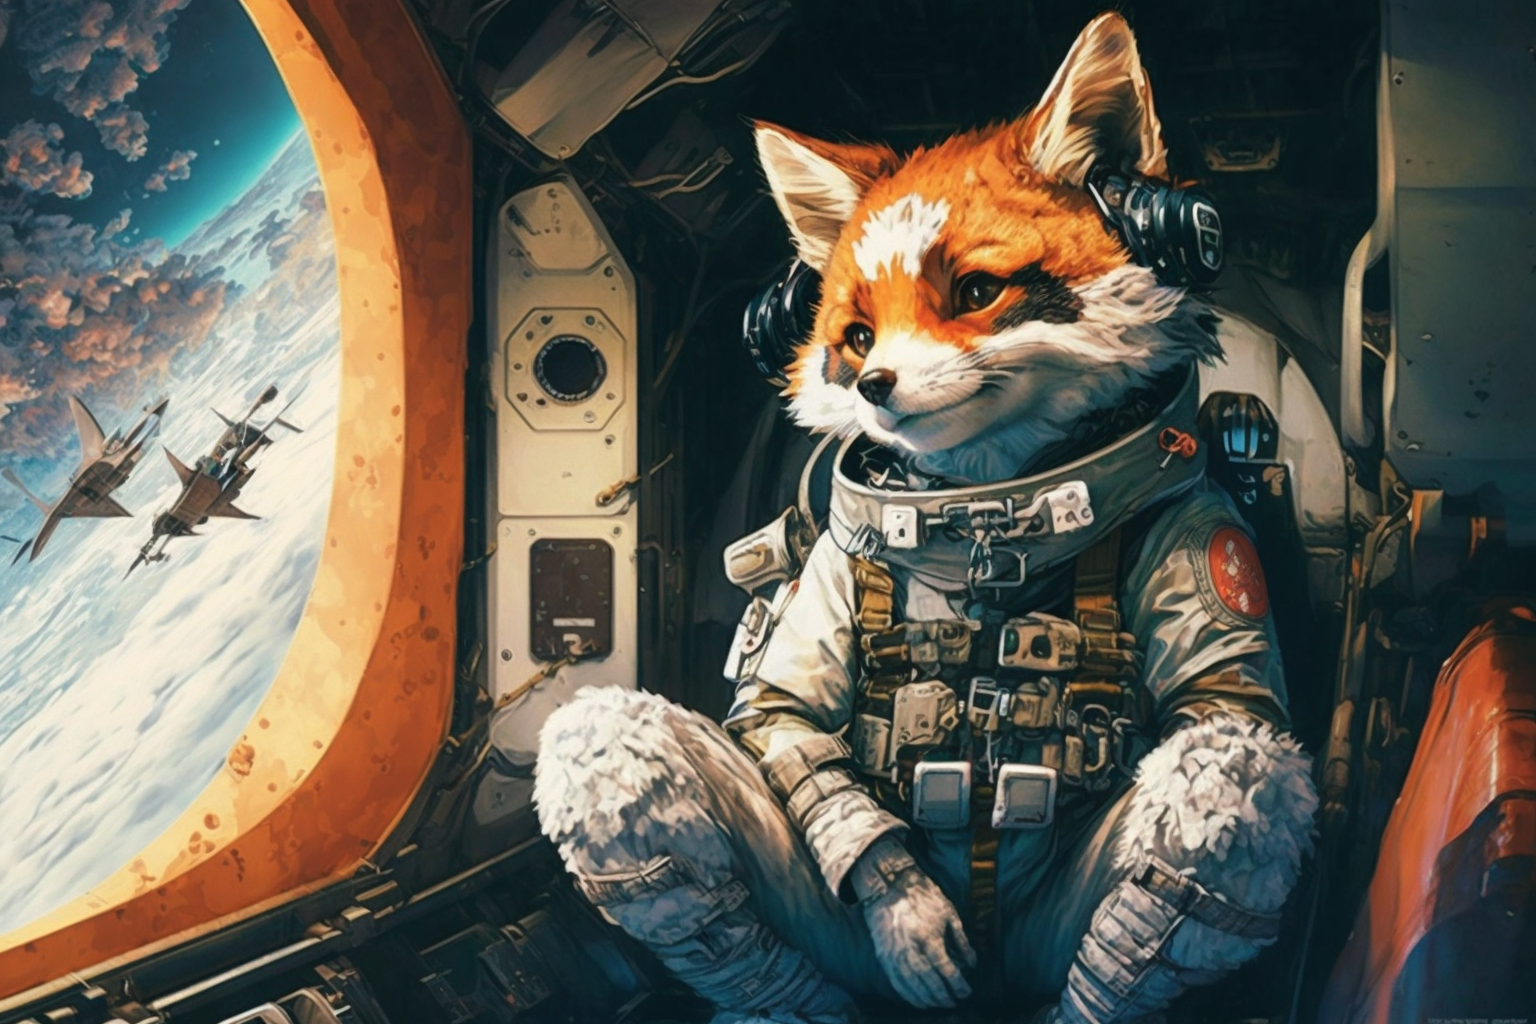 MrNoMbre_a_cute_and_fluffy_red_panda_with_pilot_outfit_view_fro_b89d1099-6795-4ba9-873d-90588a9626ad.png